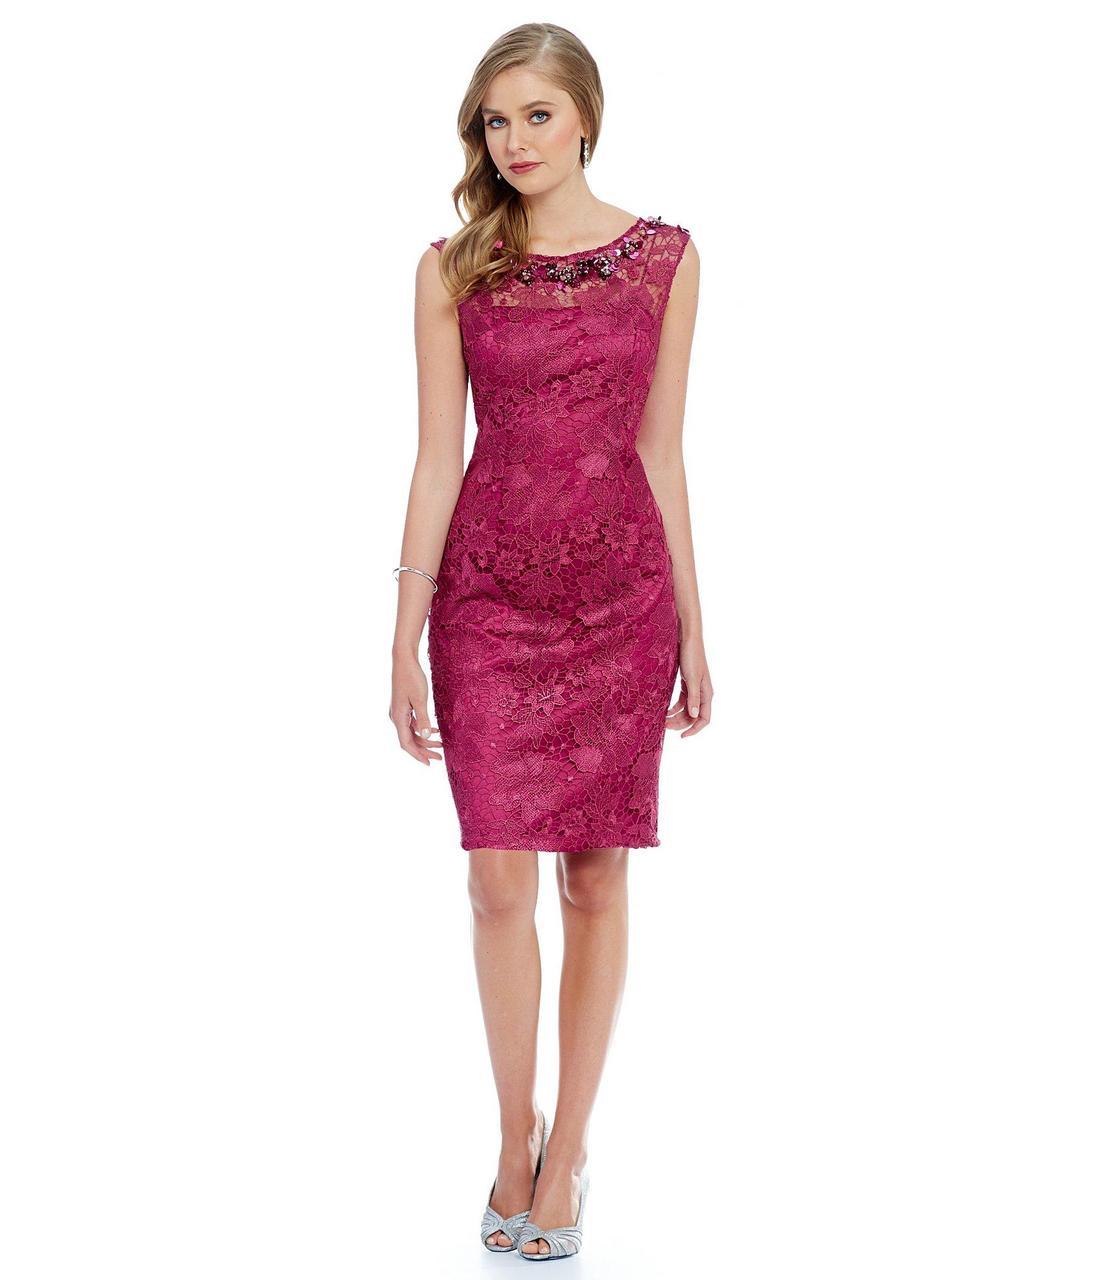 Adrianna Papell - Bateau Neckline Lace Cocktail Dress 81925540 in Pink